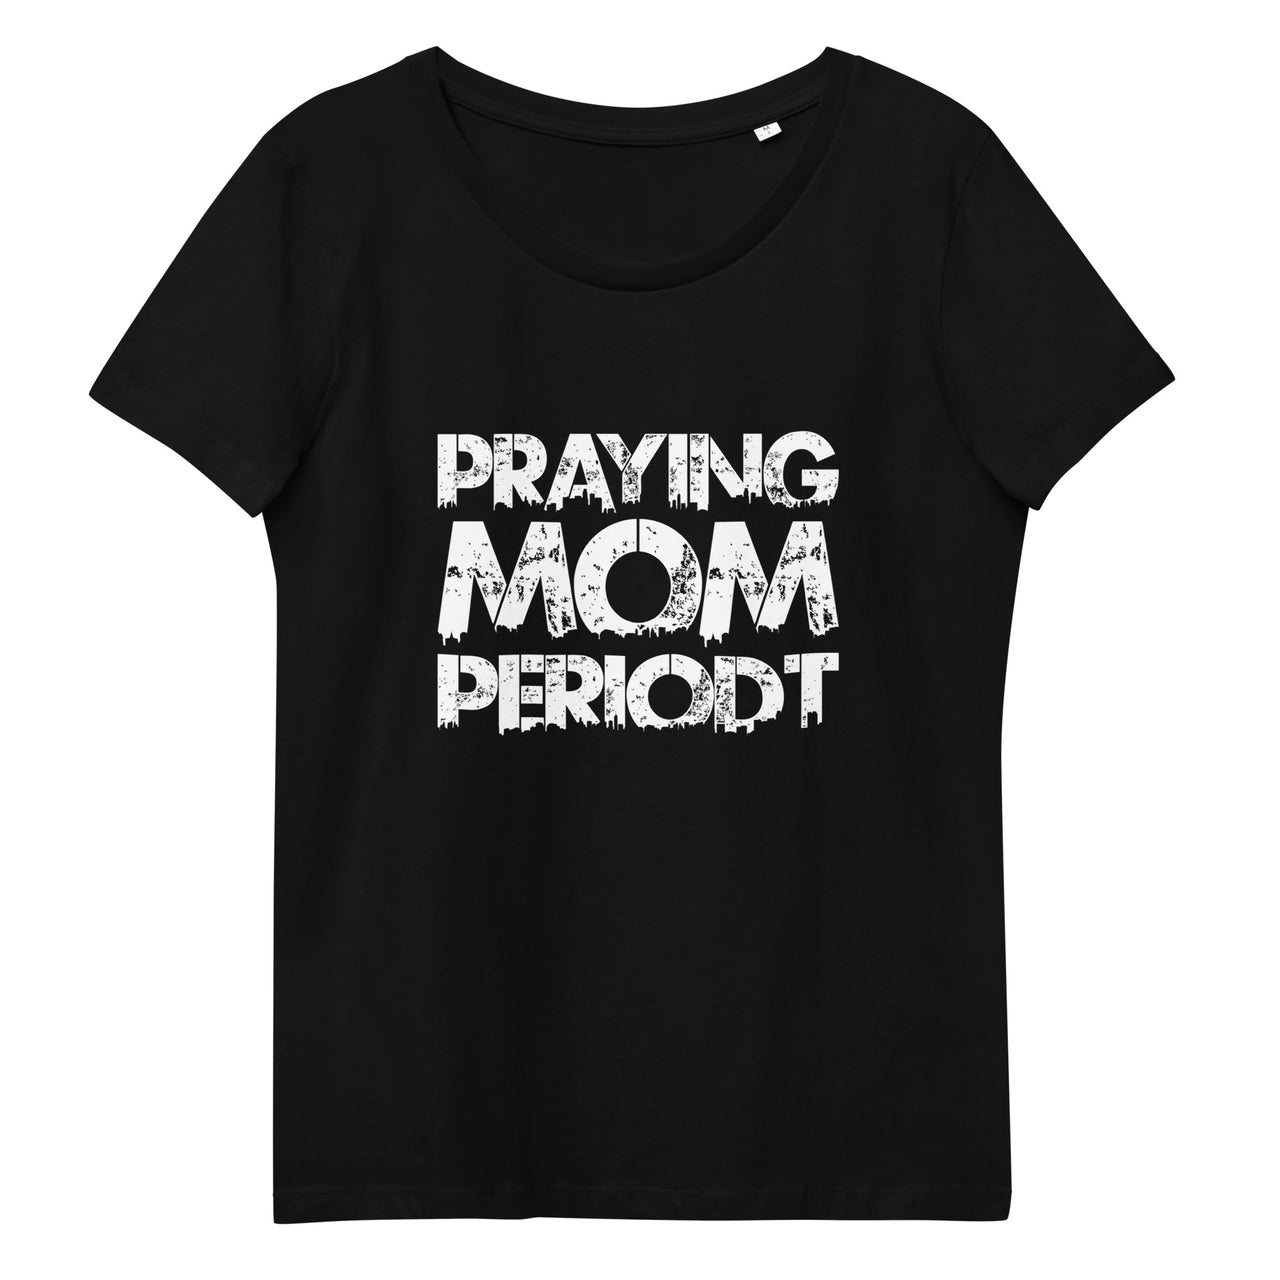 [Praying Mom Periodt] White Font Women's Fitted T-Shirts